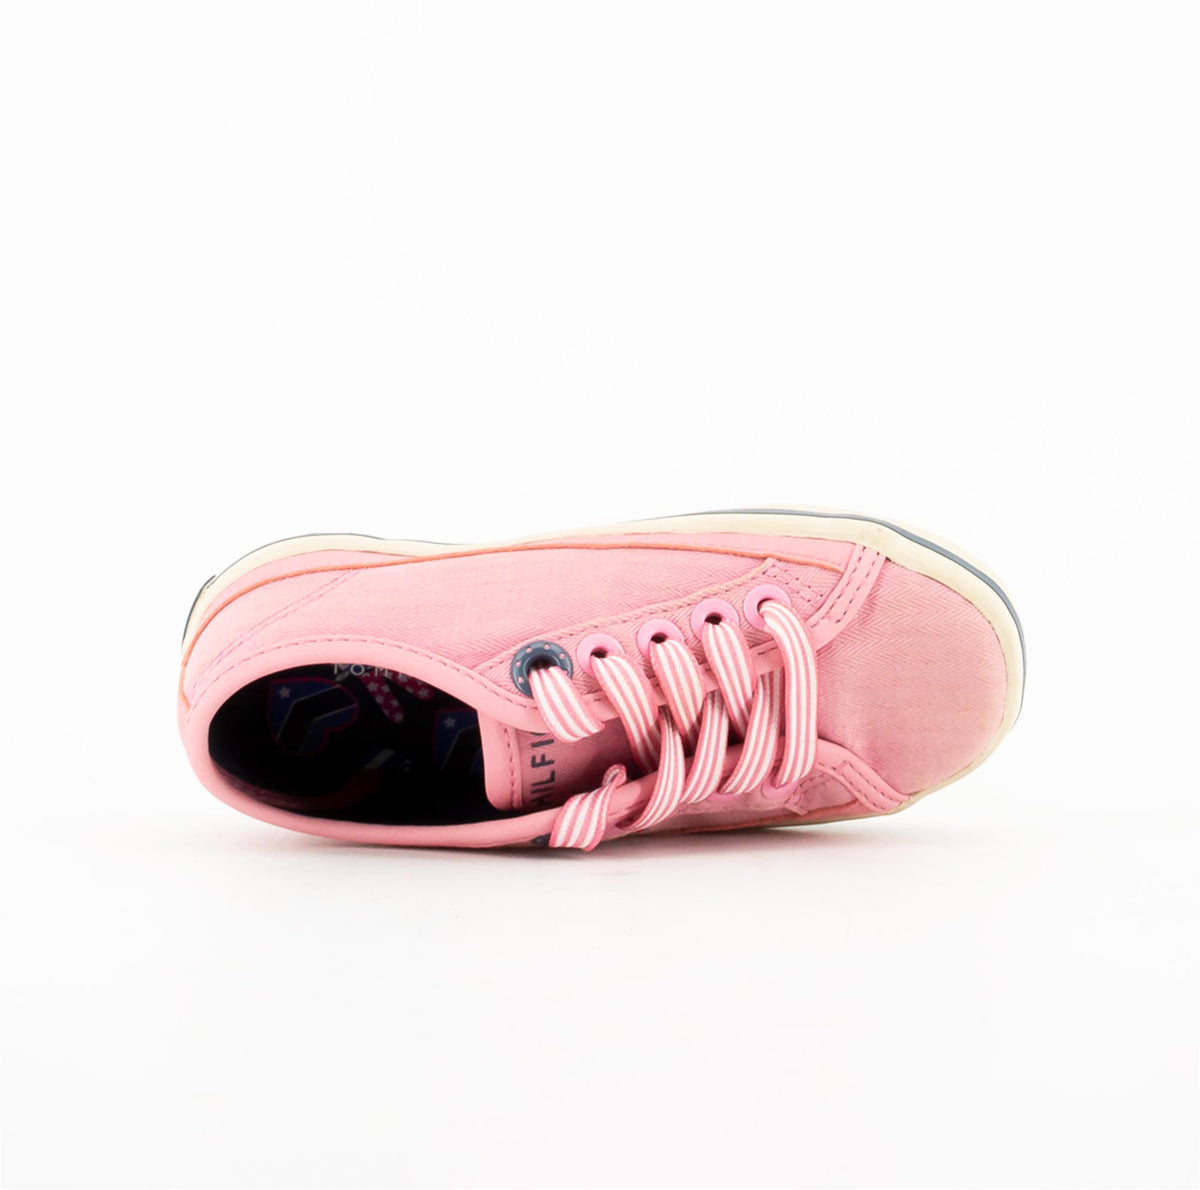 TOMMY HILFIGER | Sneakers Bambina | FG0FG00109